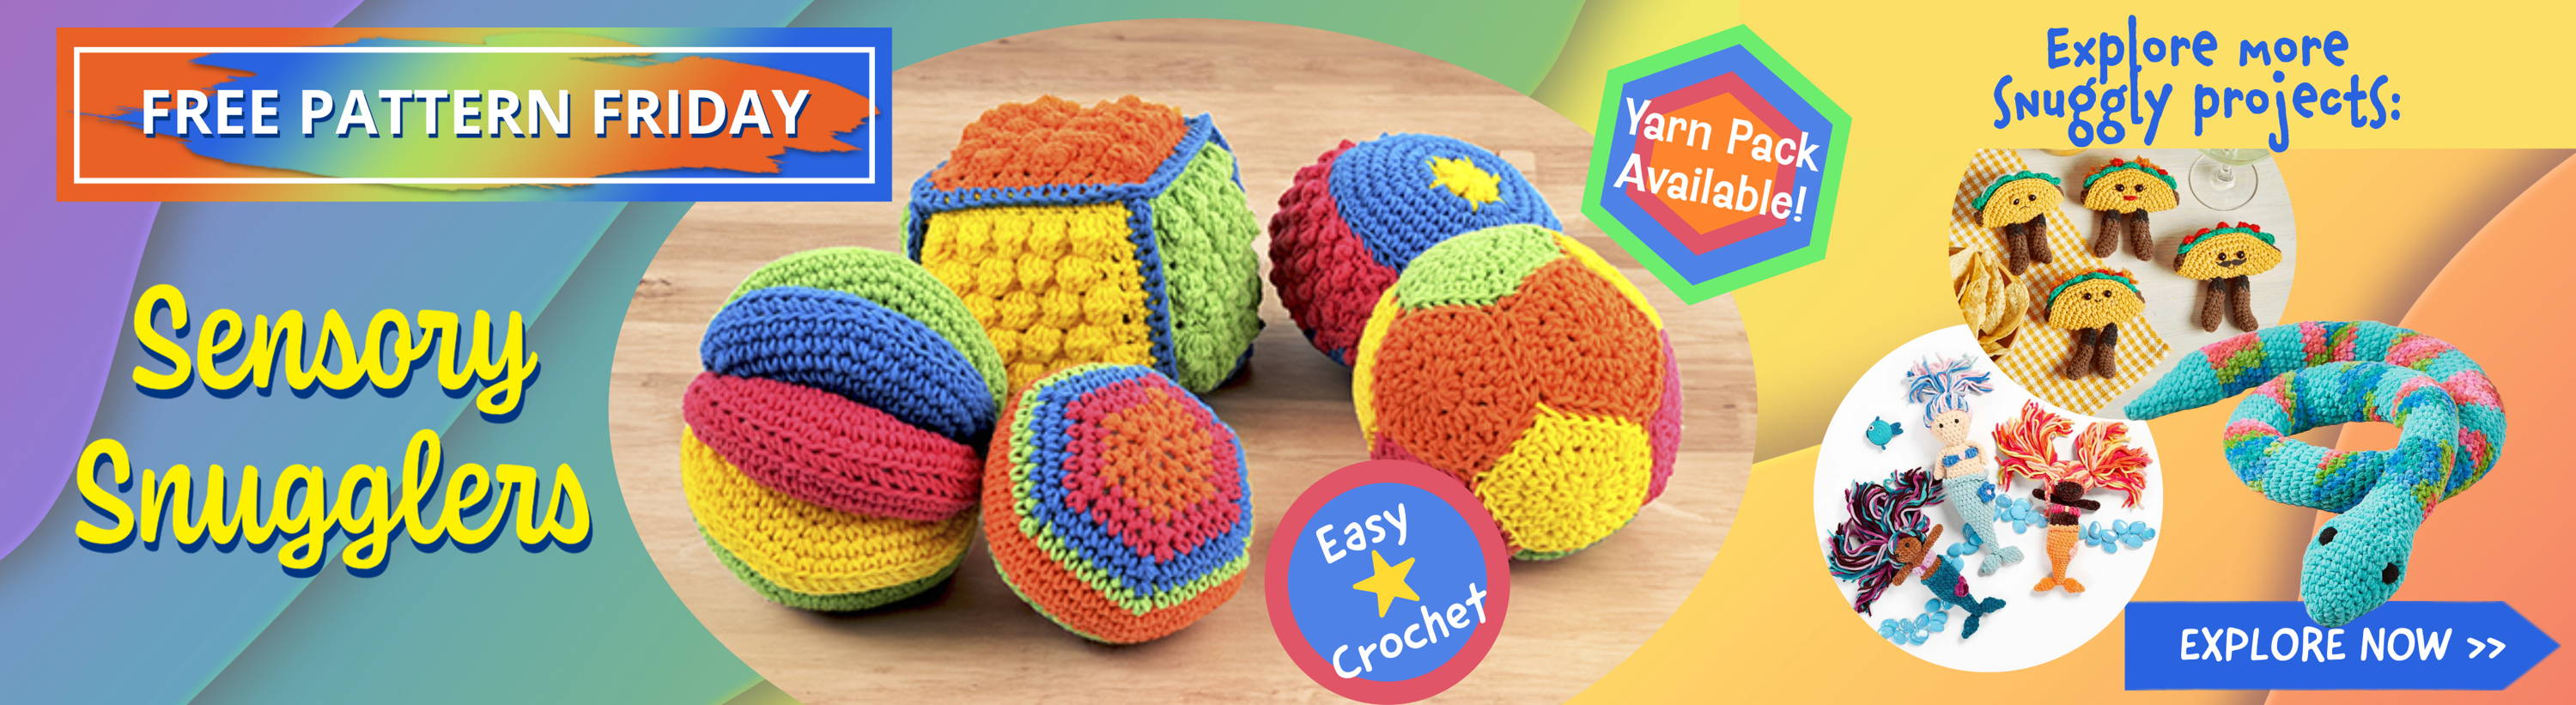 Free Pattern Friday! Sensory Snugglers and more Snuggly projects to explore! Image: Sensory Snugglers (Easy Crochet) Kit.